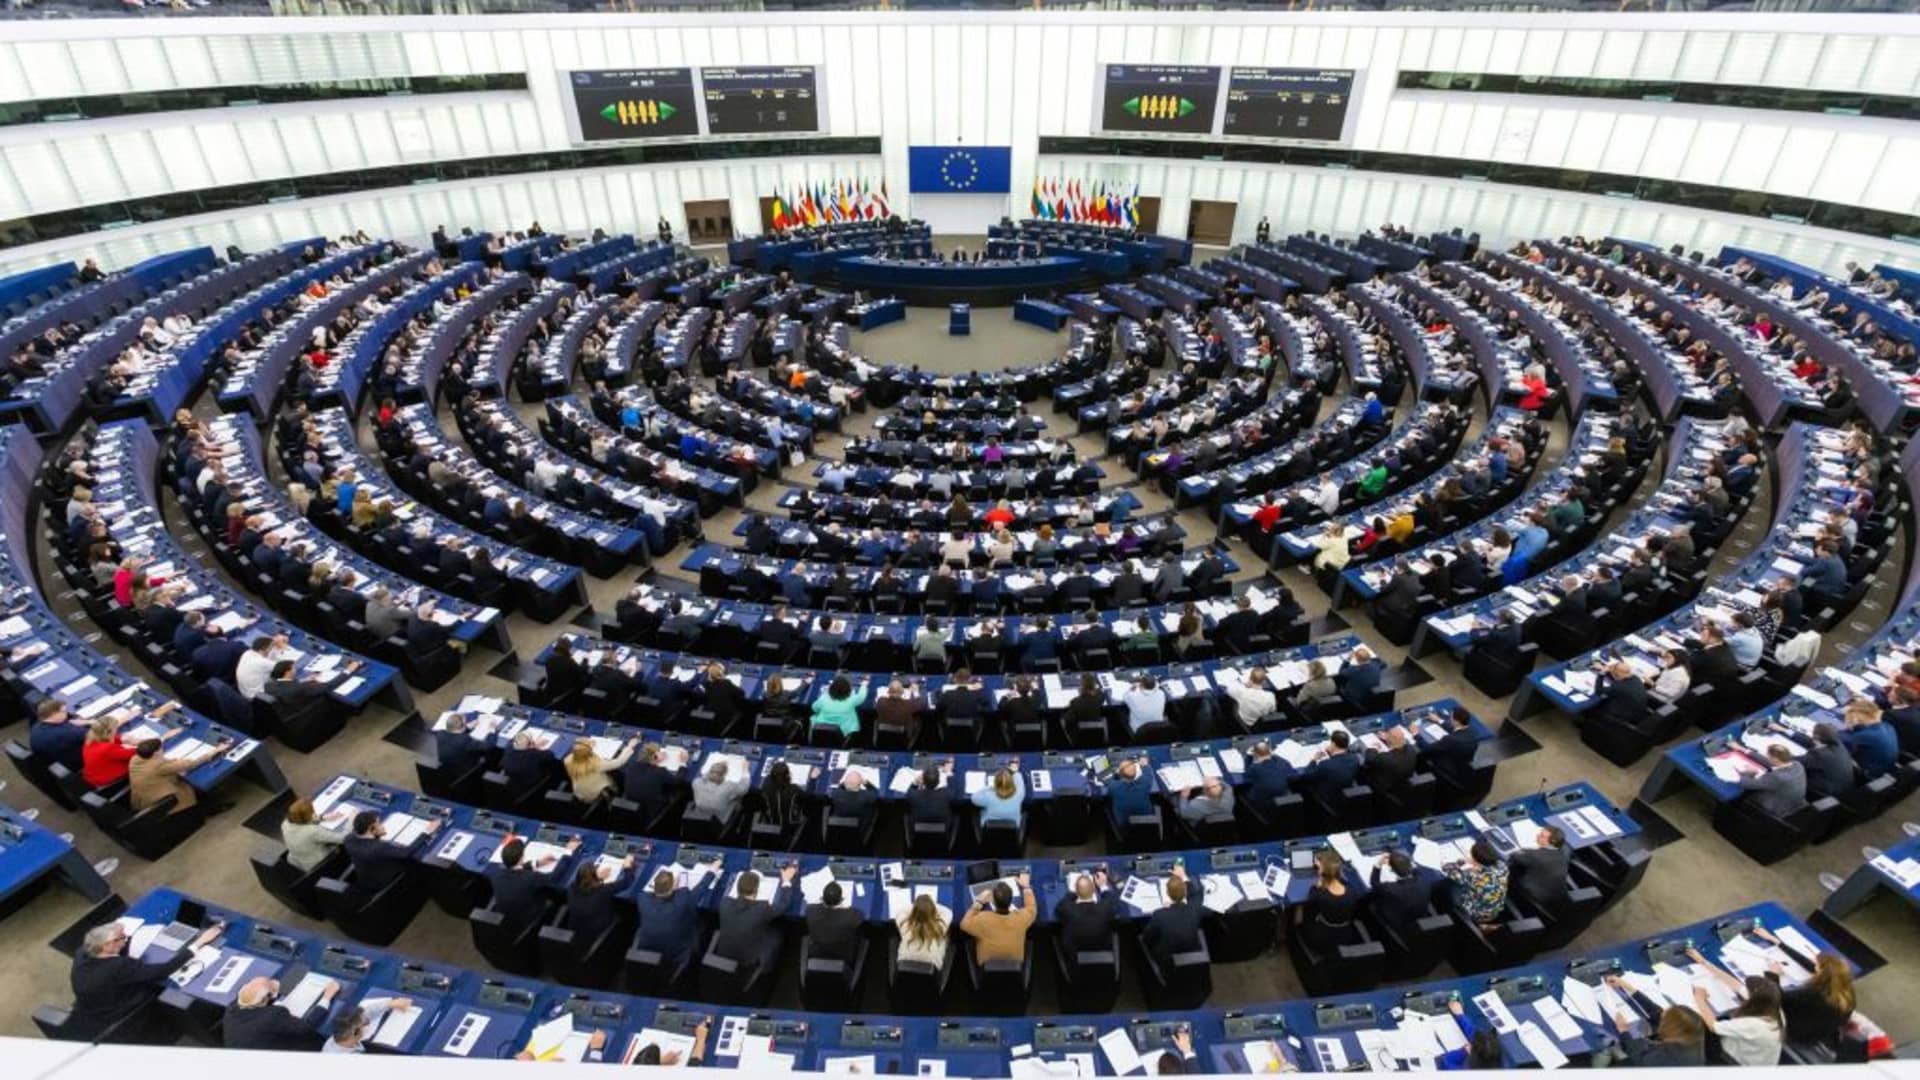 Members of the European Parliament sit during a voting session in the plenary hall of the European Parliament. The EU Parliament is focused on discussing the issue of Ukraine. Expected is the presentation of a sixth package of sanctions, which includes the exit from Russian oil.